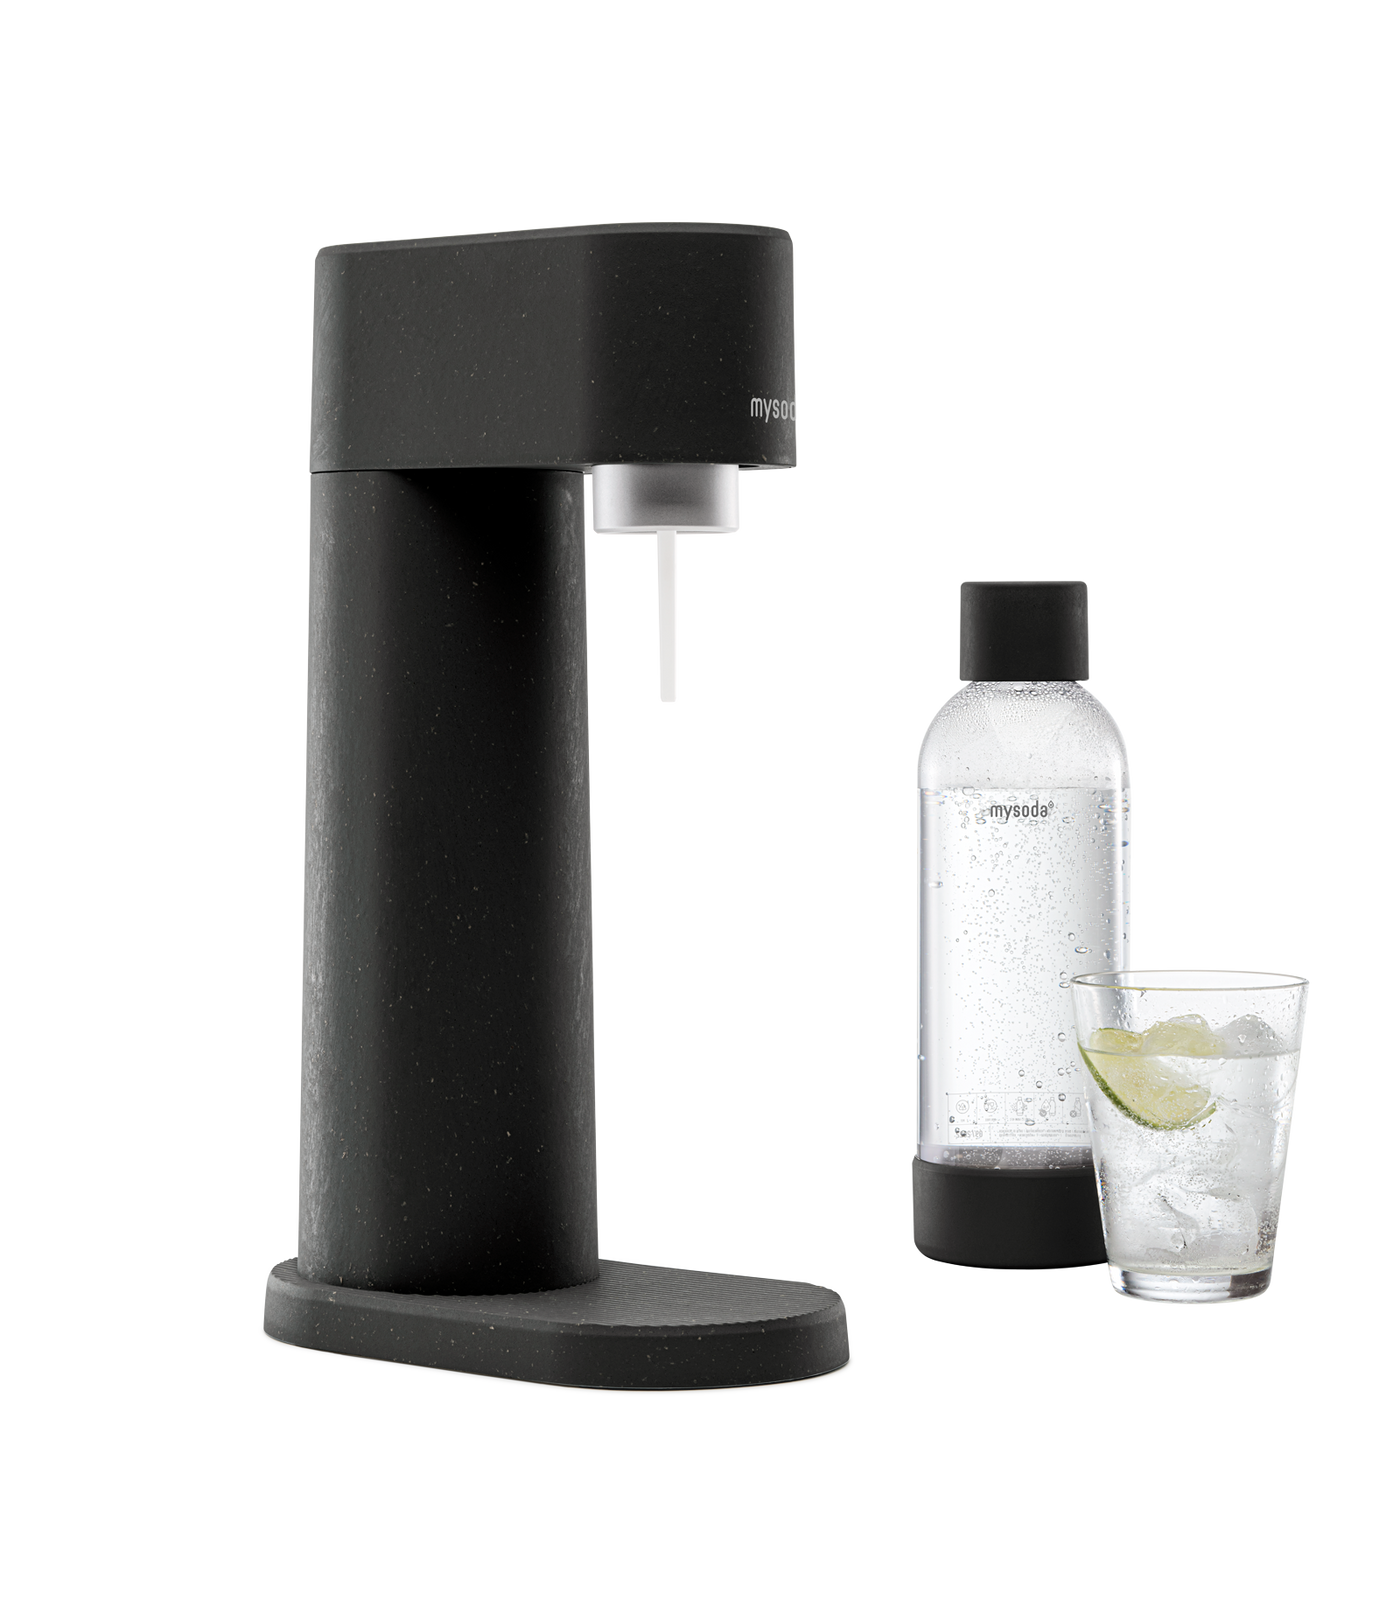 Black Mysoda Woody sparkling water maker with bottle